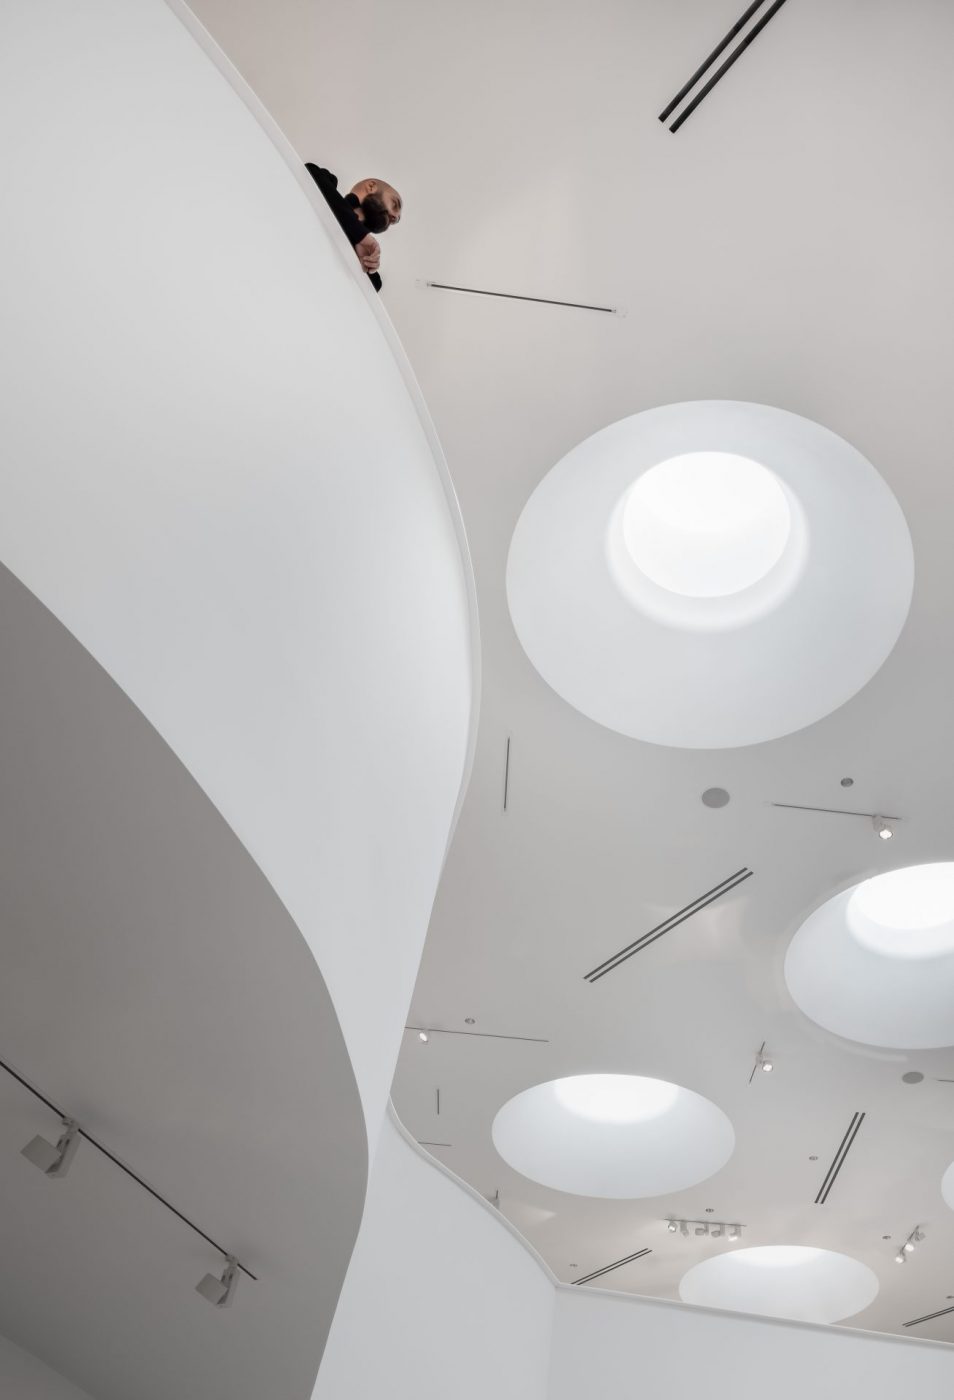 A person looks over the edge of a white balcony in a Winnipeg Art Gallery-Qaumajuq gallery.